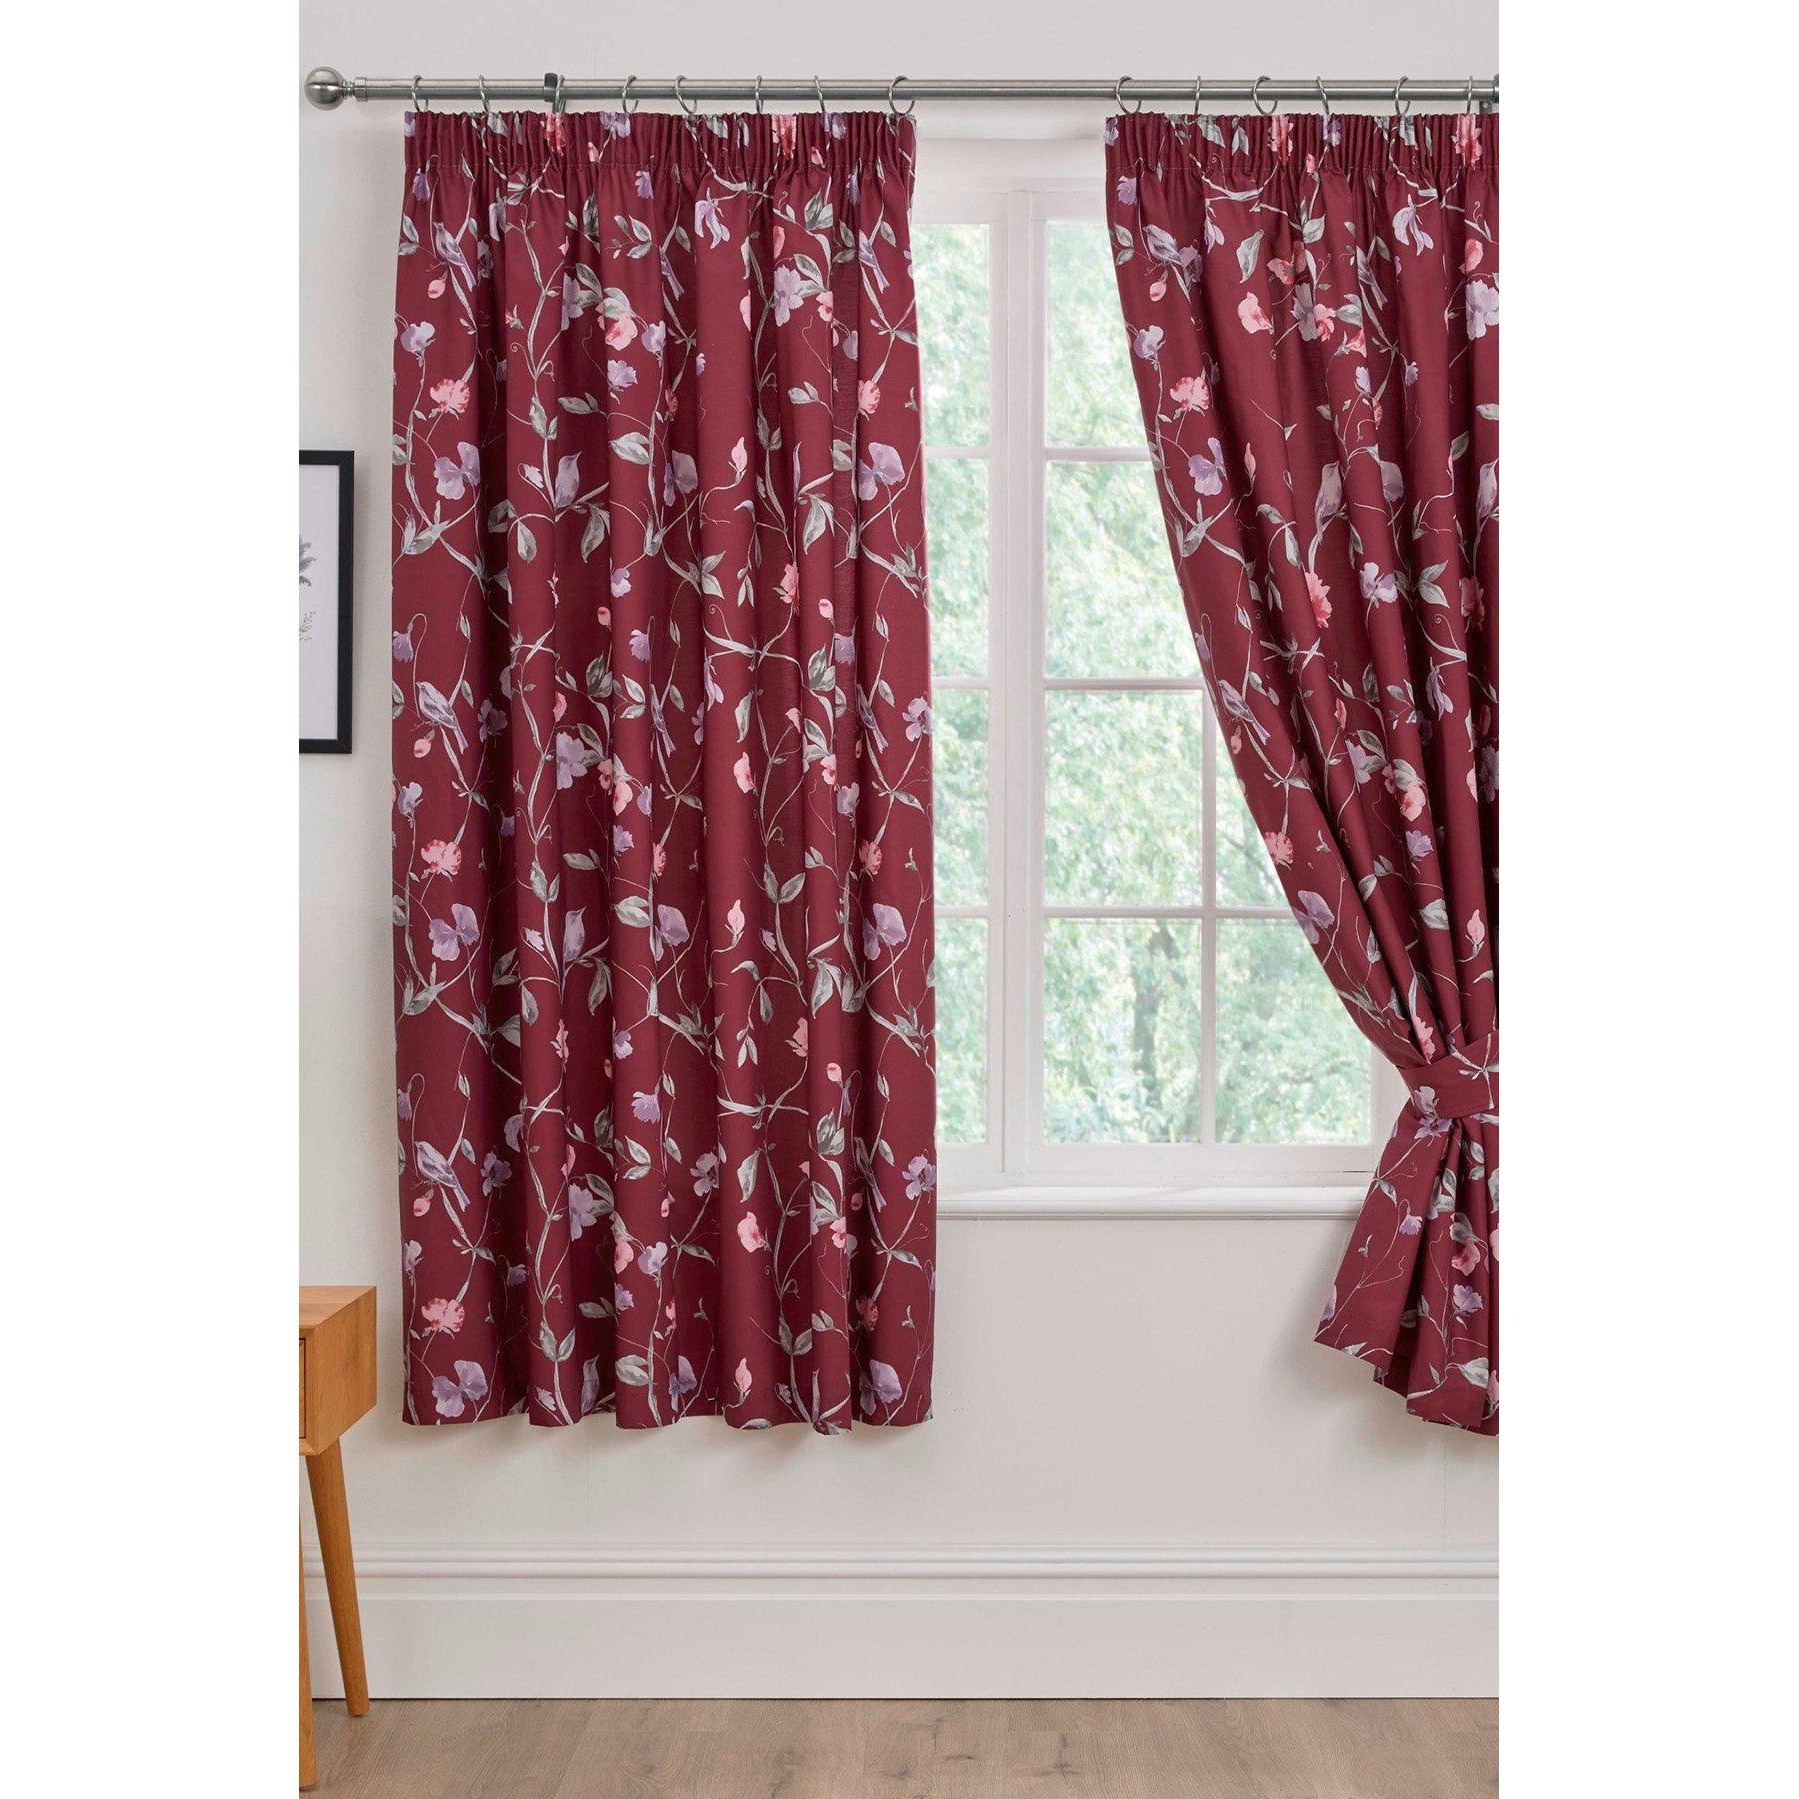 'Sweet Pea' Pair of Pencil Pleat Curtains With Tie-Backs - image 1